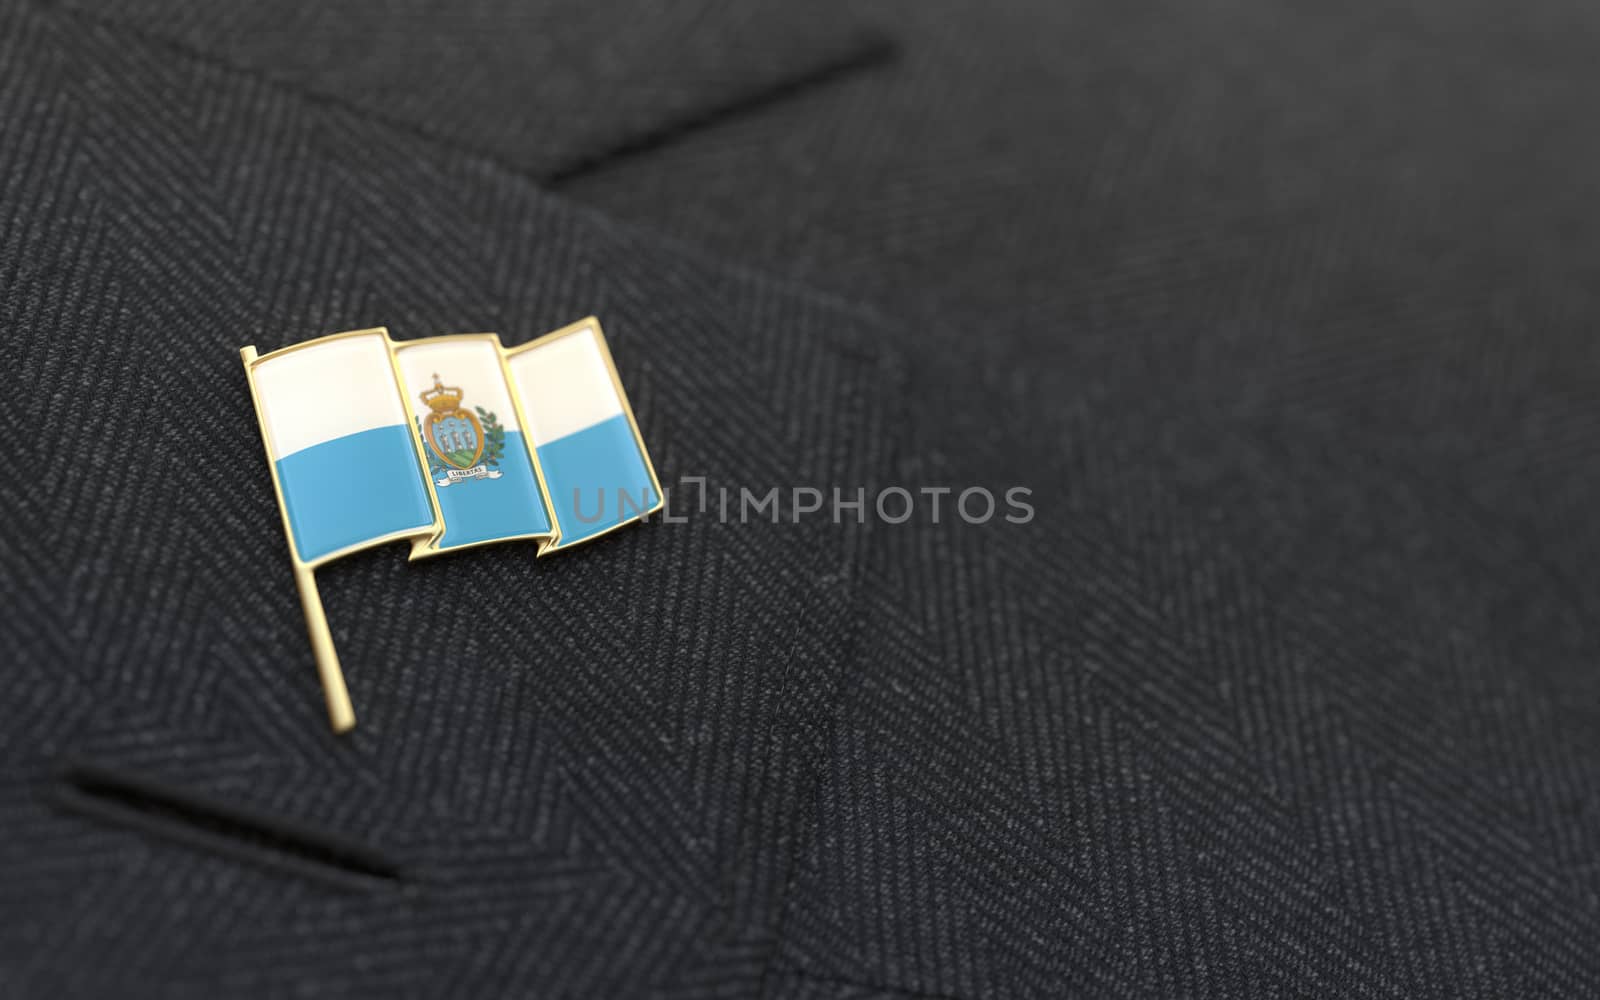 San Marino flag lapel pin on the collar of a business suit jacket shows patriotism